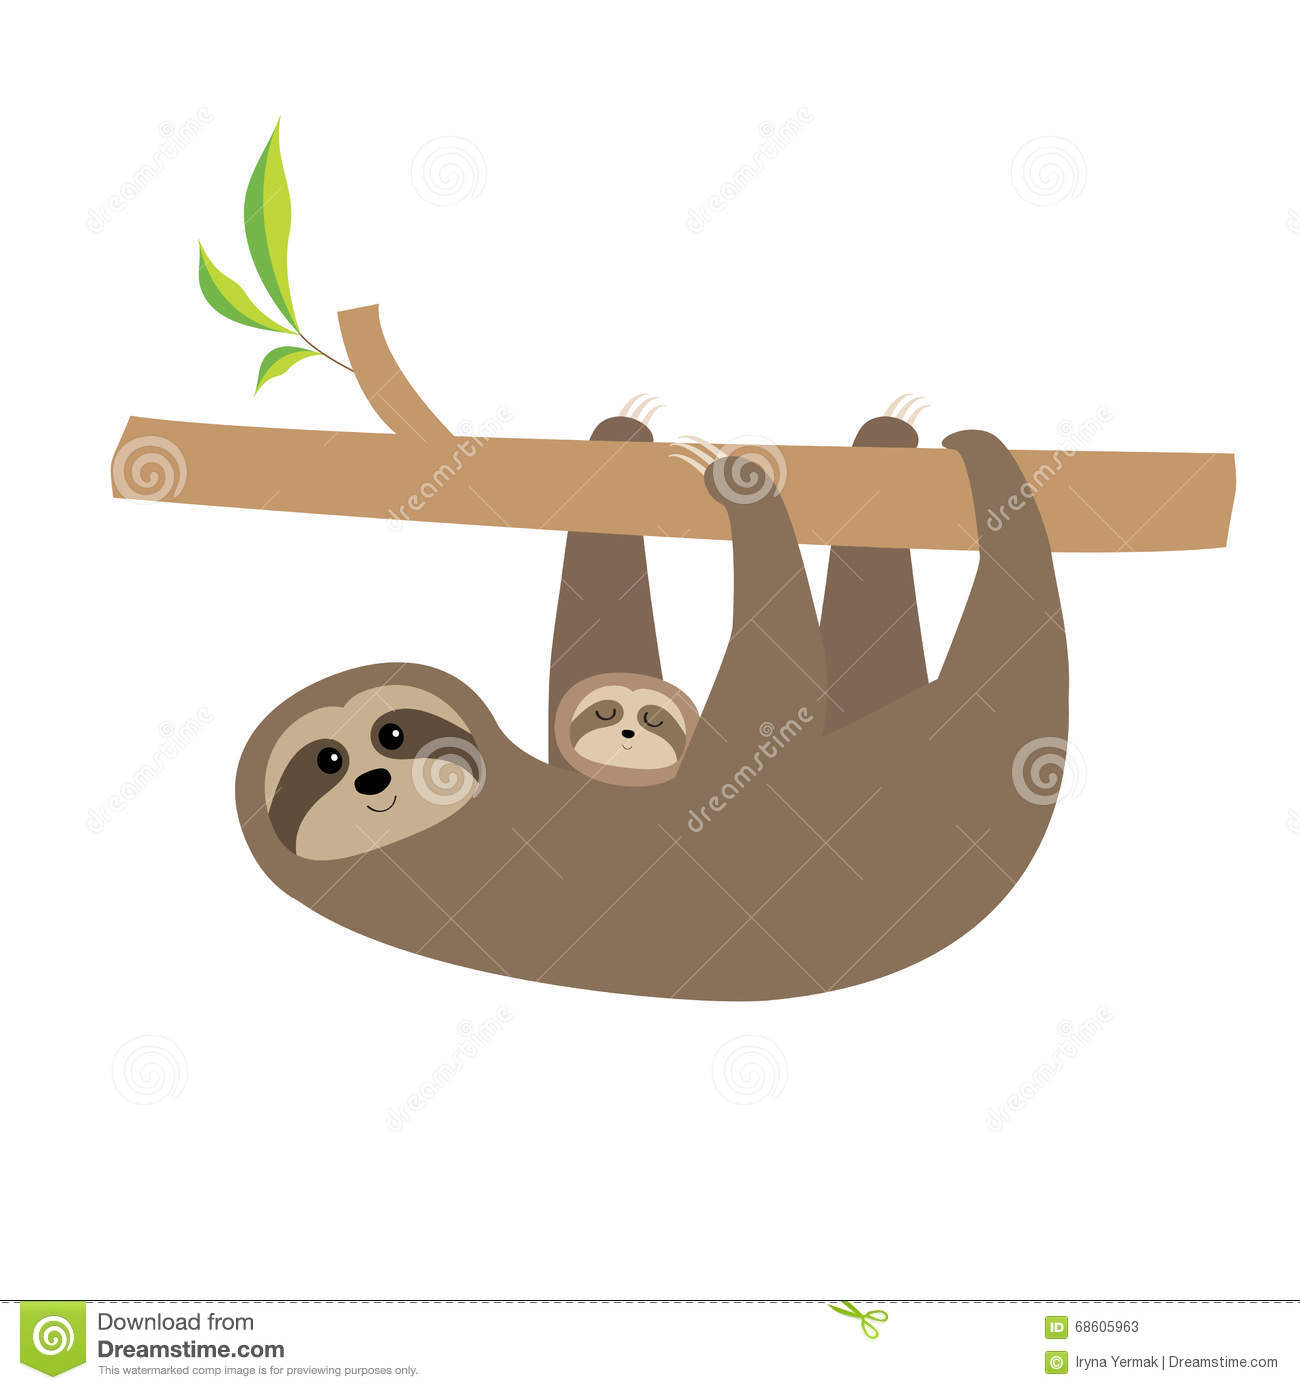 Three Toed Sloth clipart #9, Download drawings